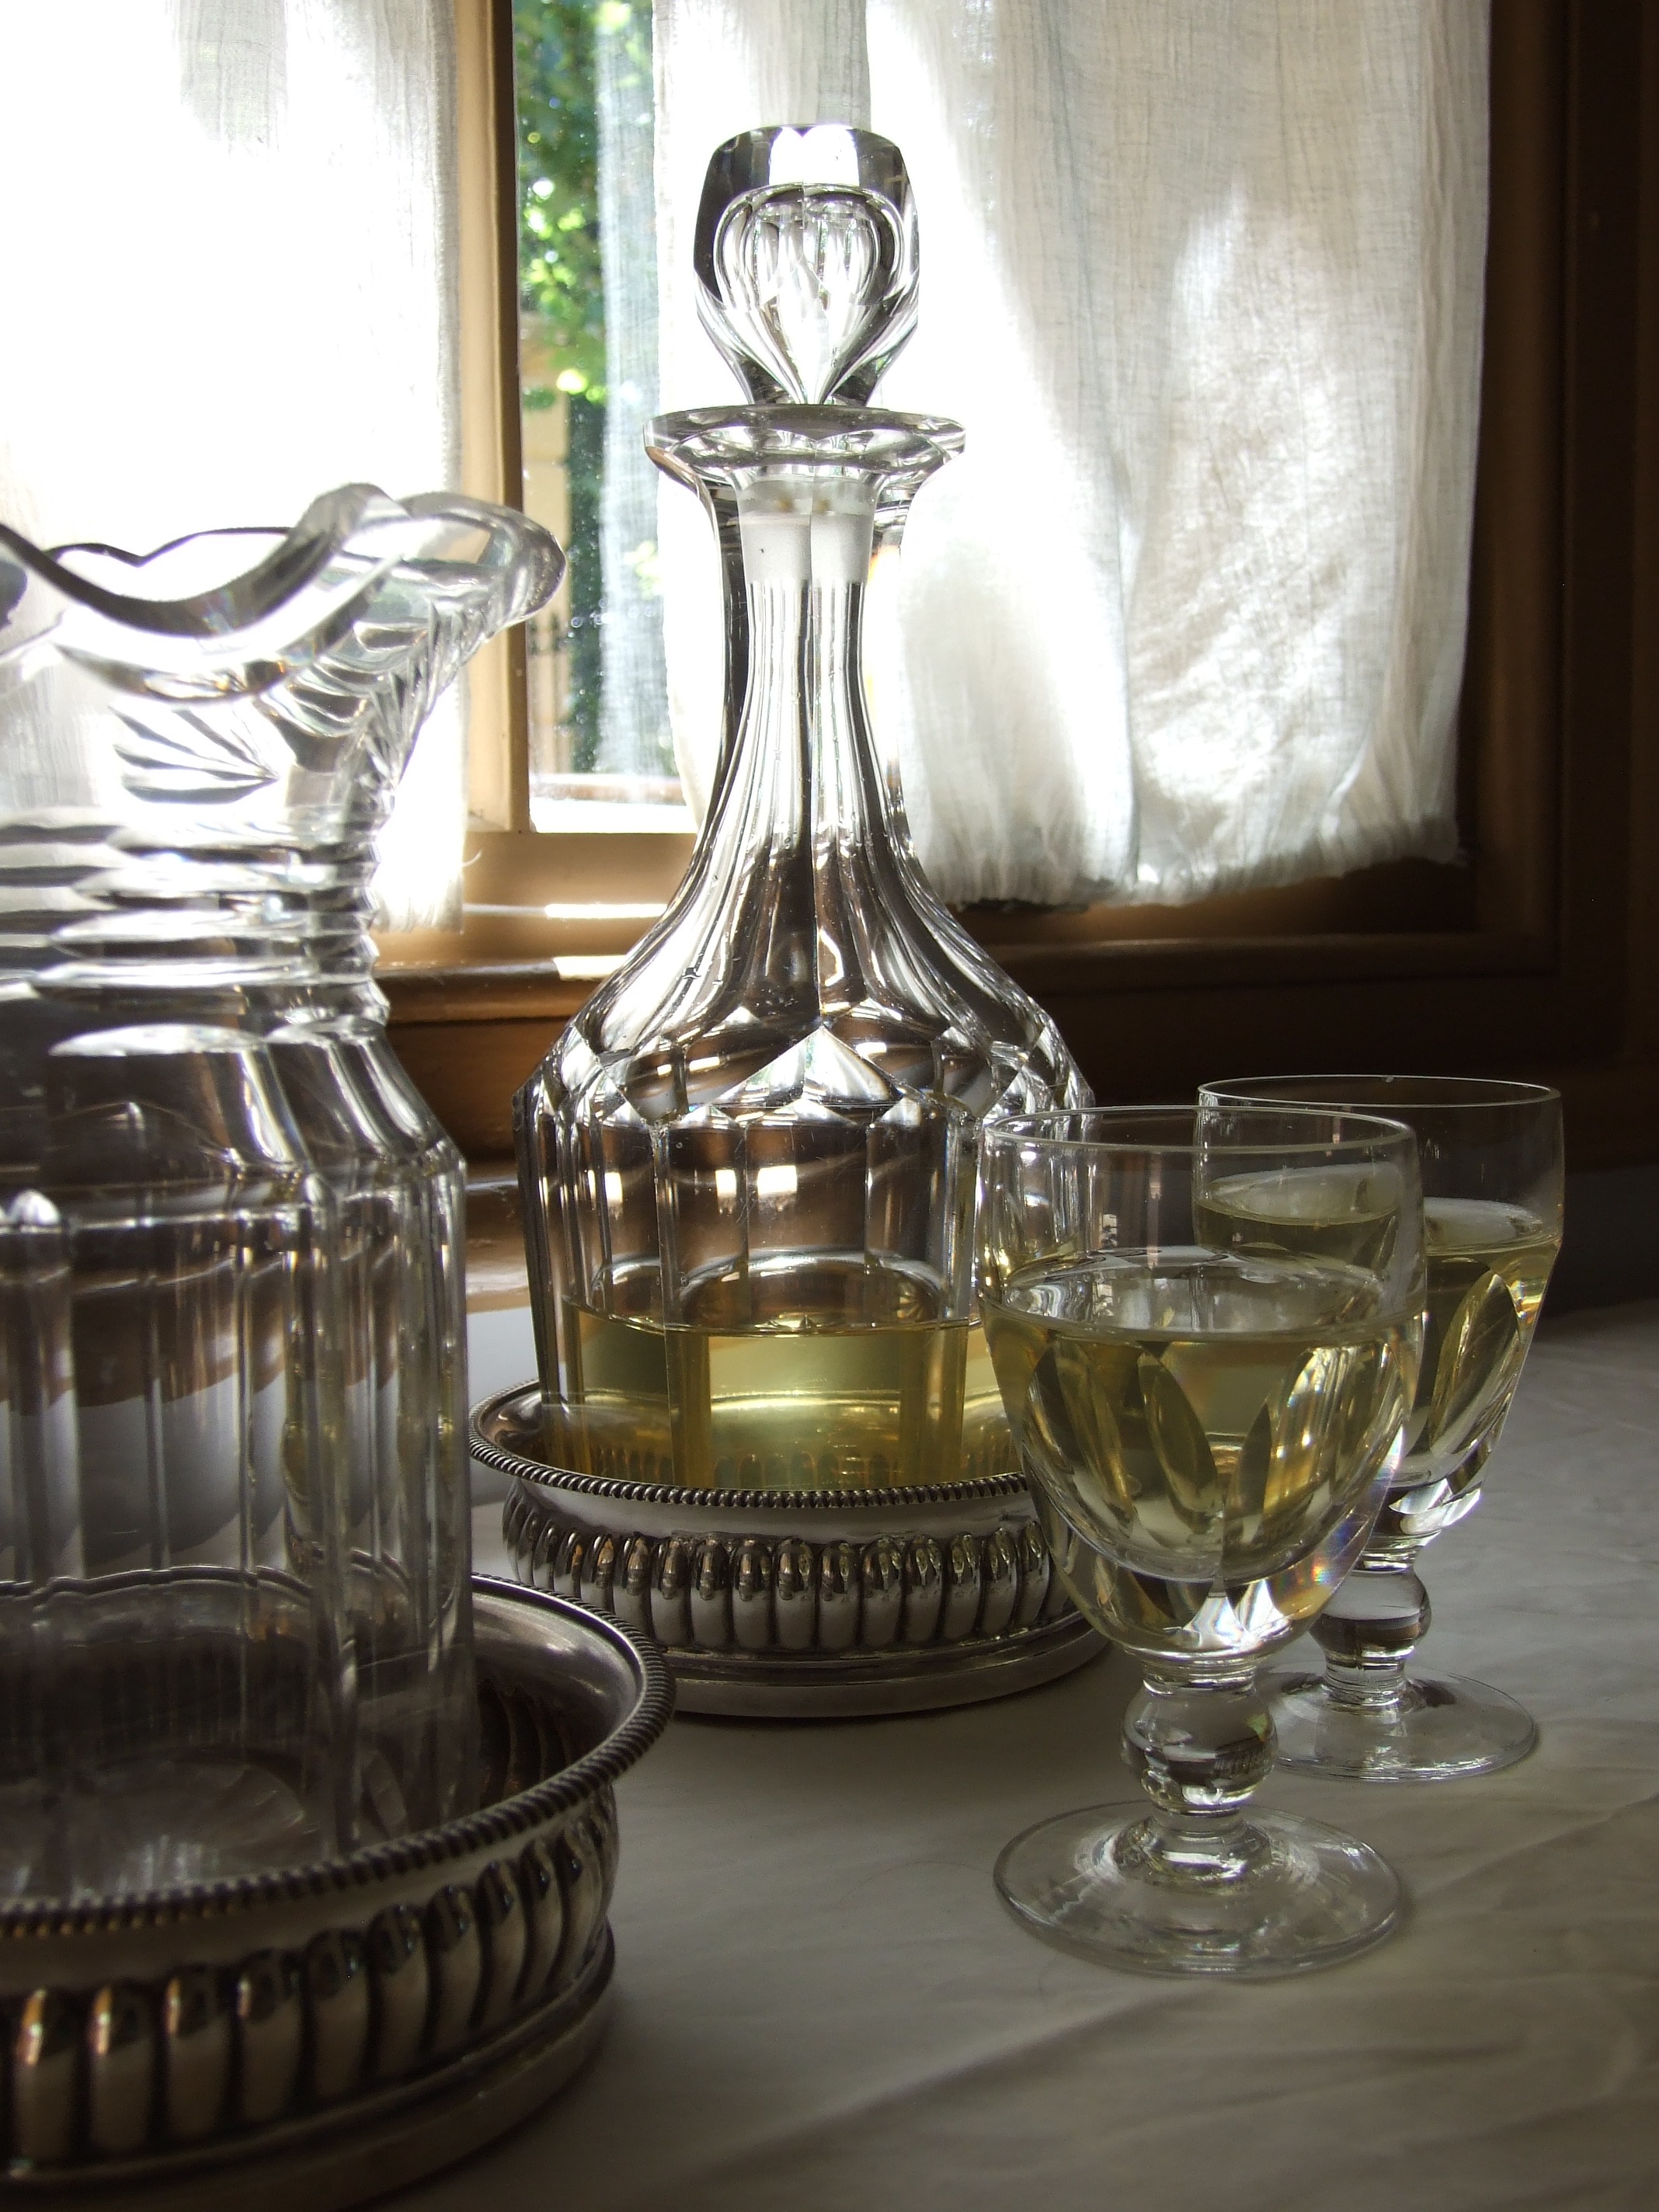 Wine decanters and glasses.